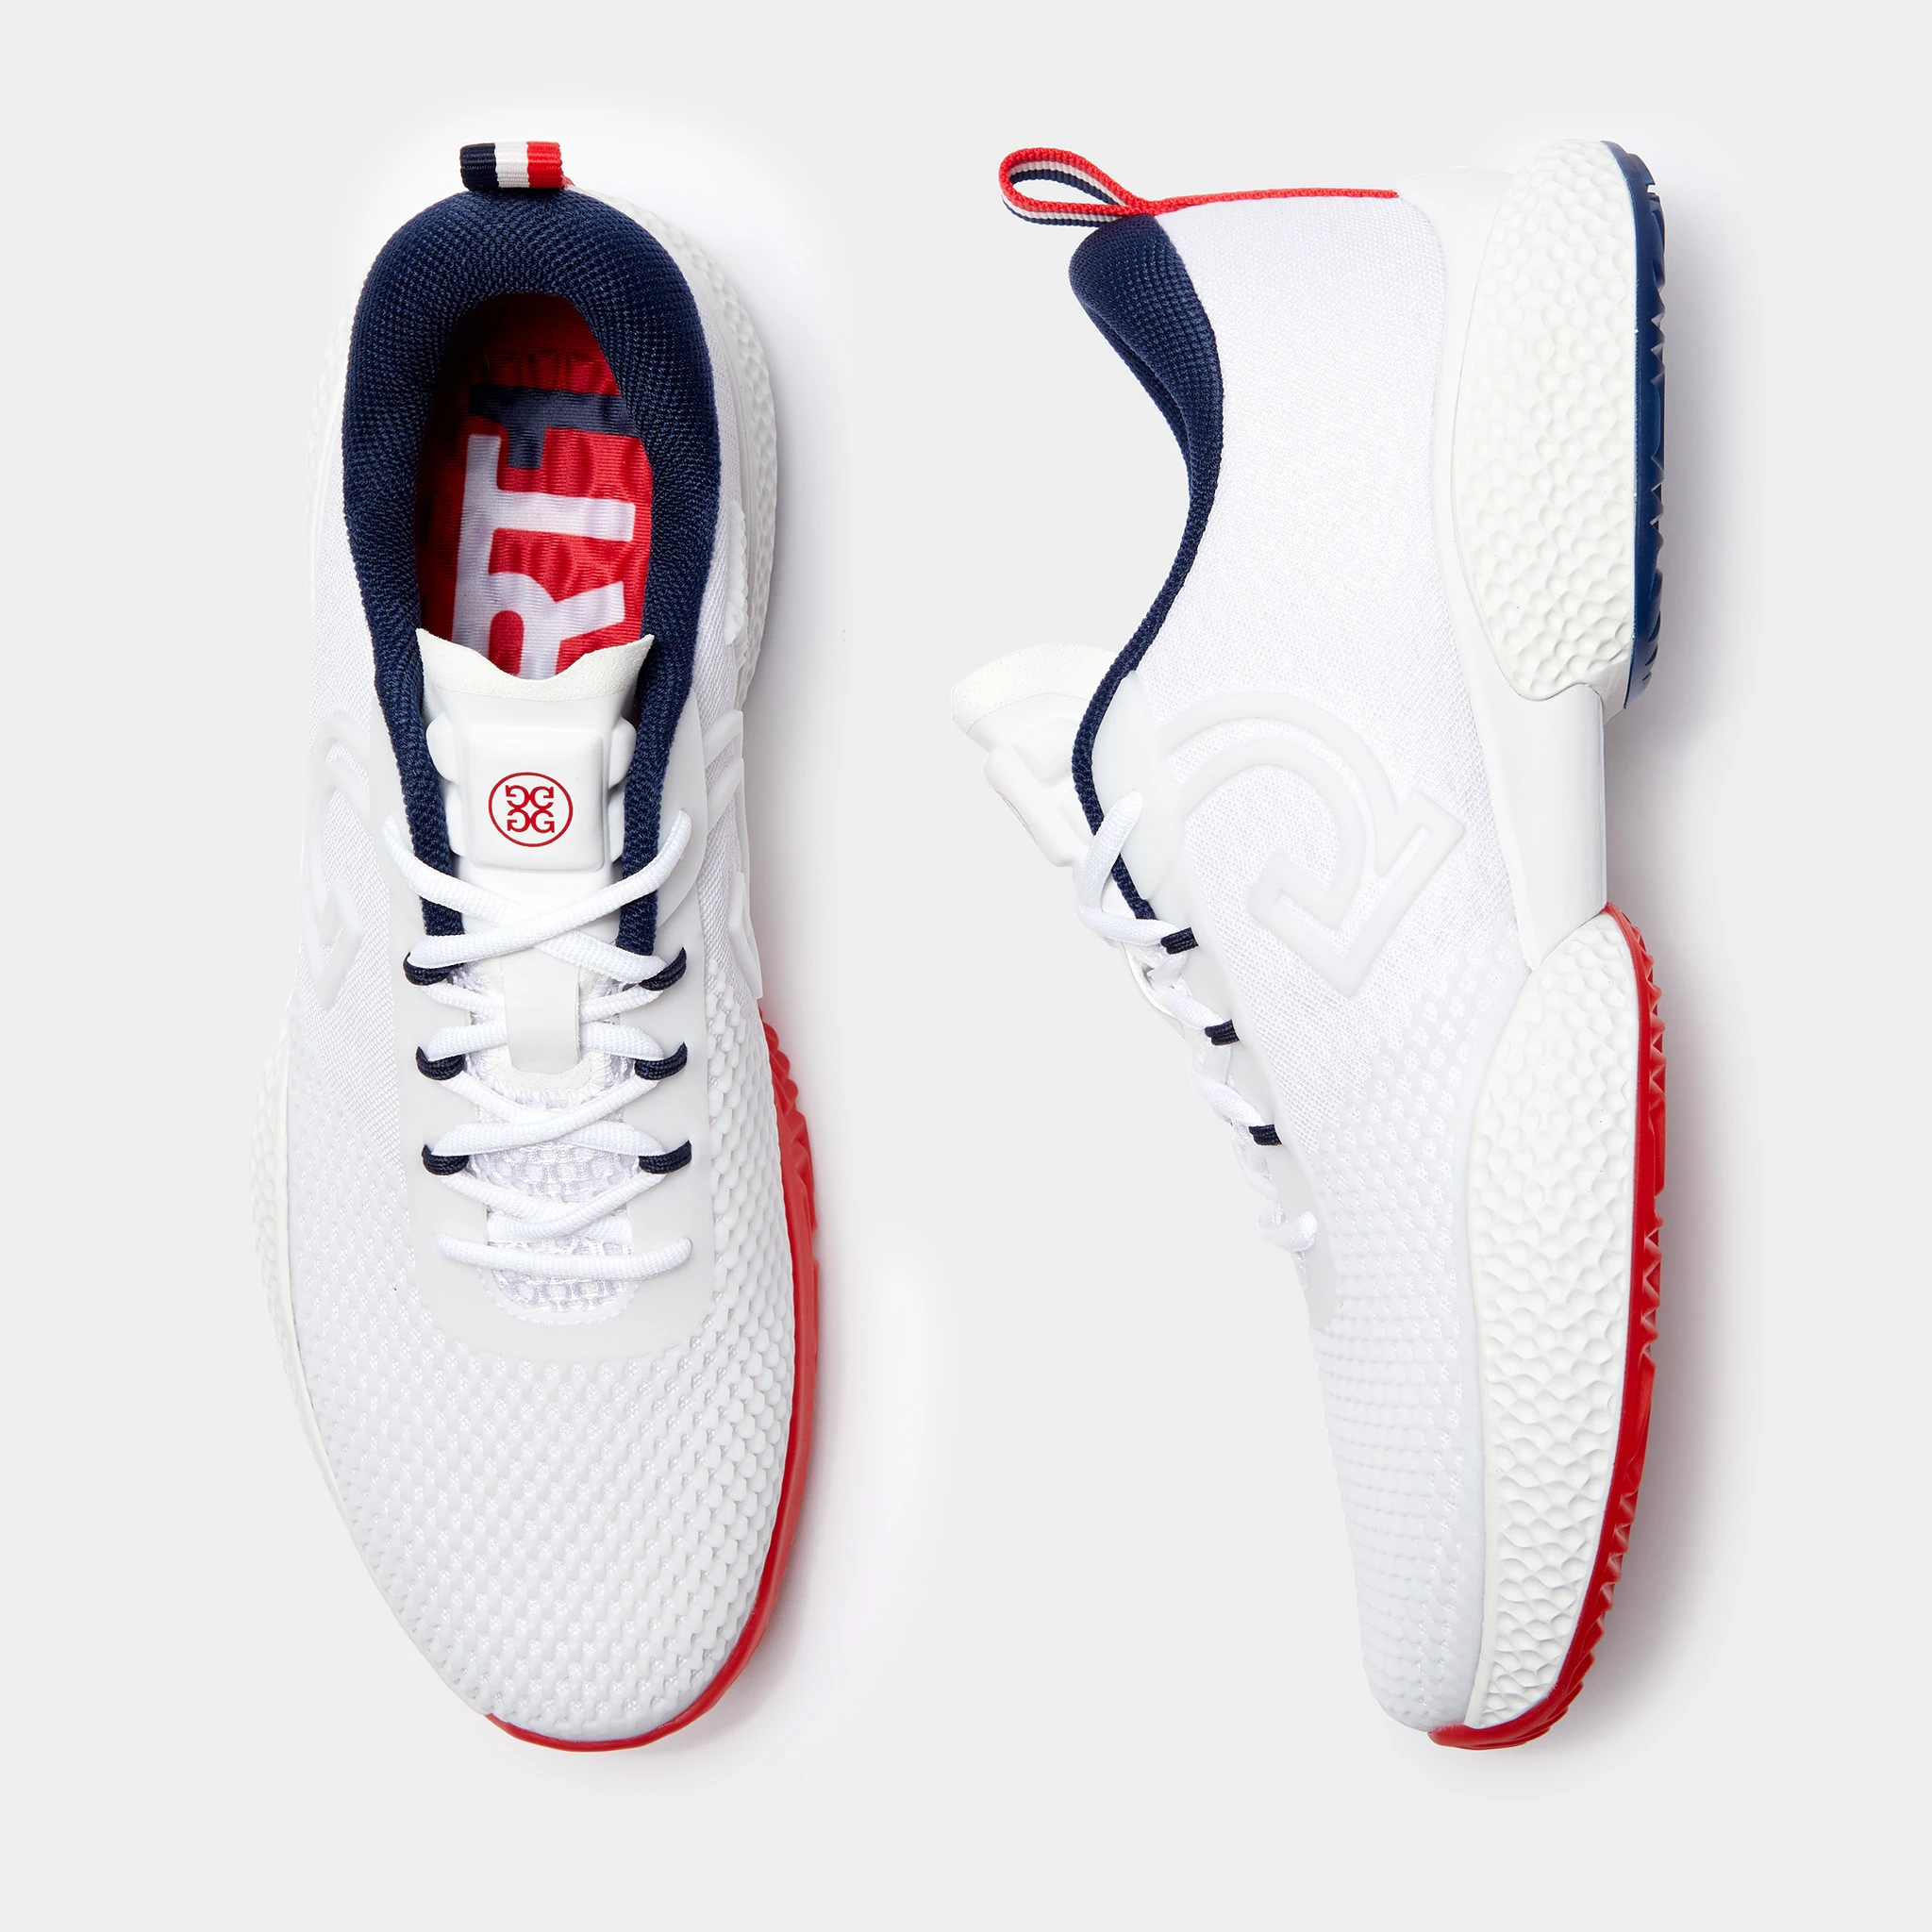 MENS PICKLE BALL SHOES